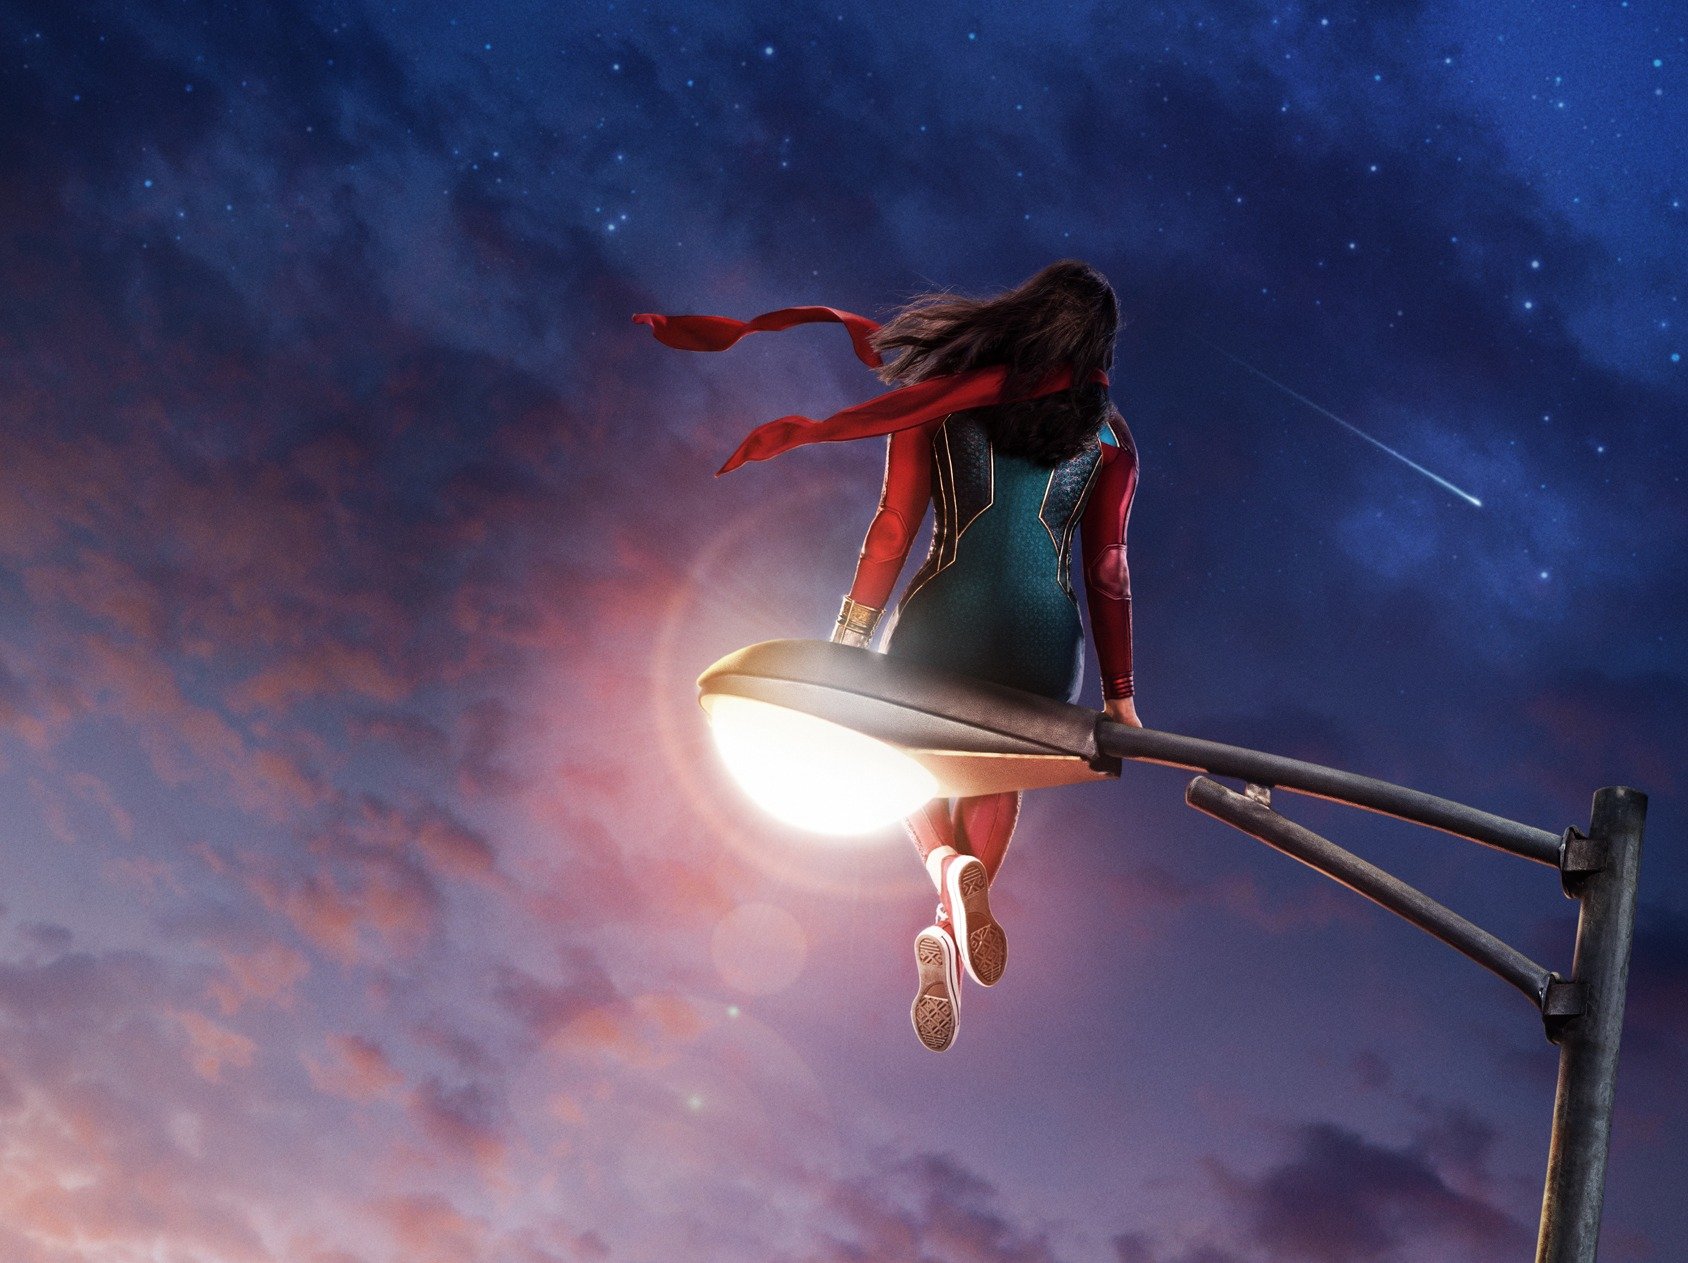 Key art for 'Ms. Marvel,' which has yet to be renewed for season 2. It shows Kamala Khan sitting on a street lamp and staring out at the cityscape.